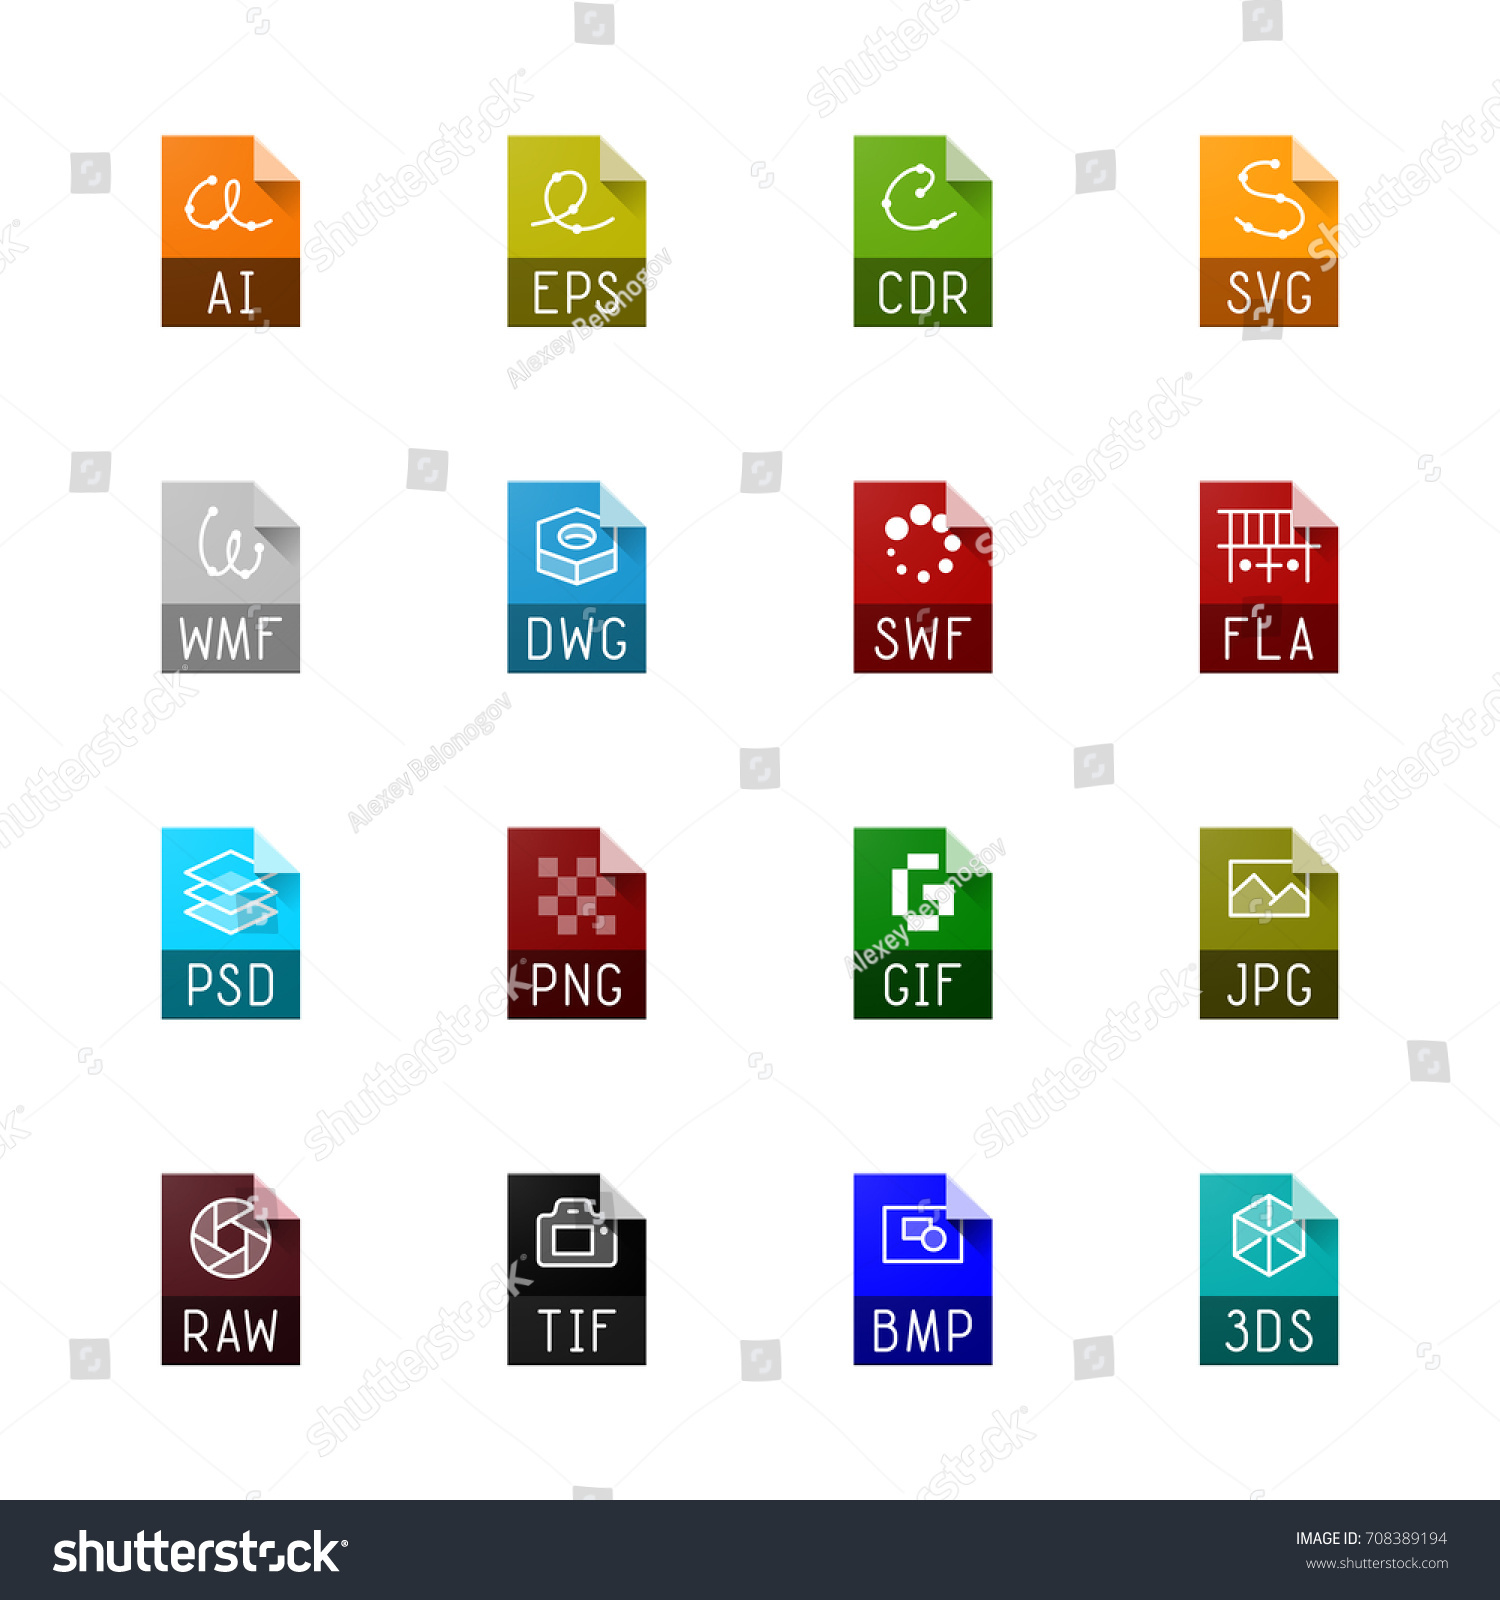 SVG of File type icons - Graphics svg